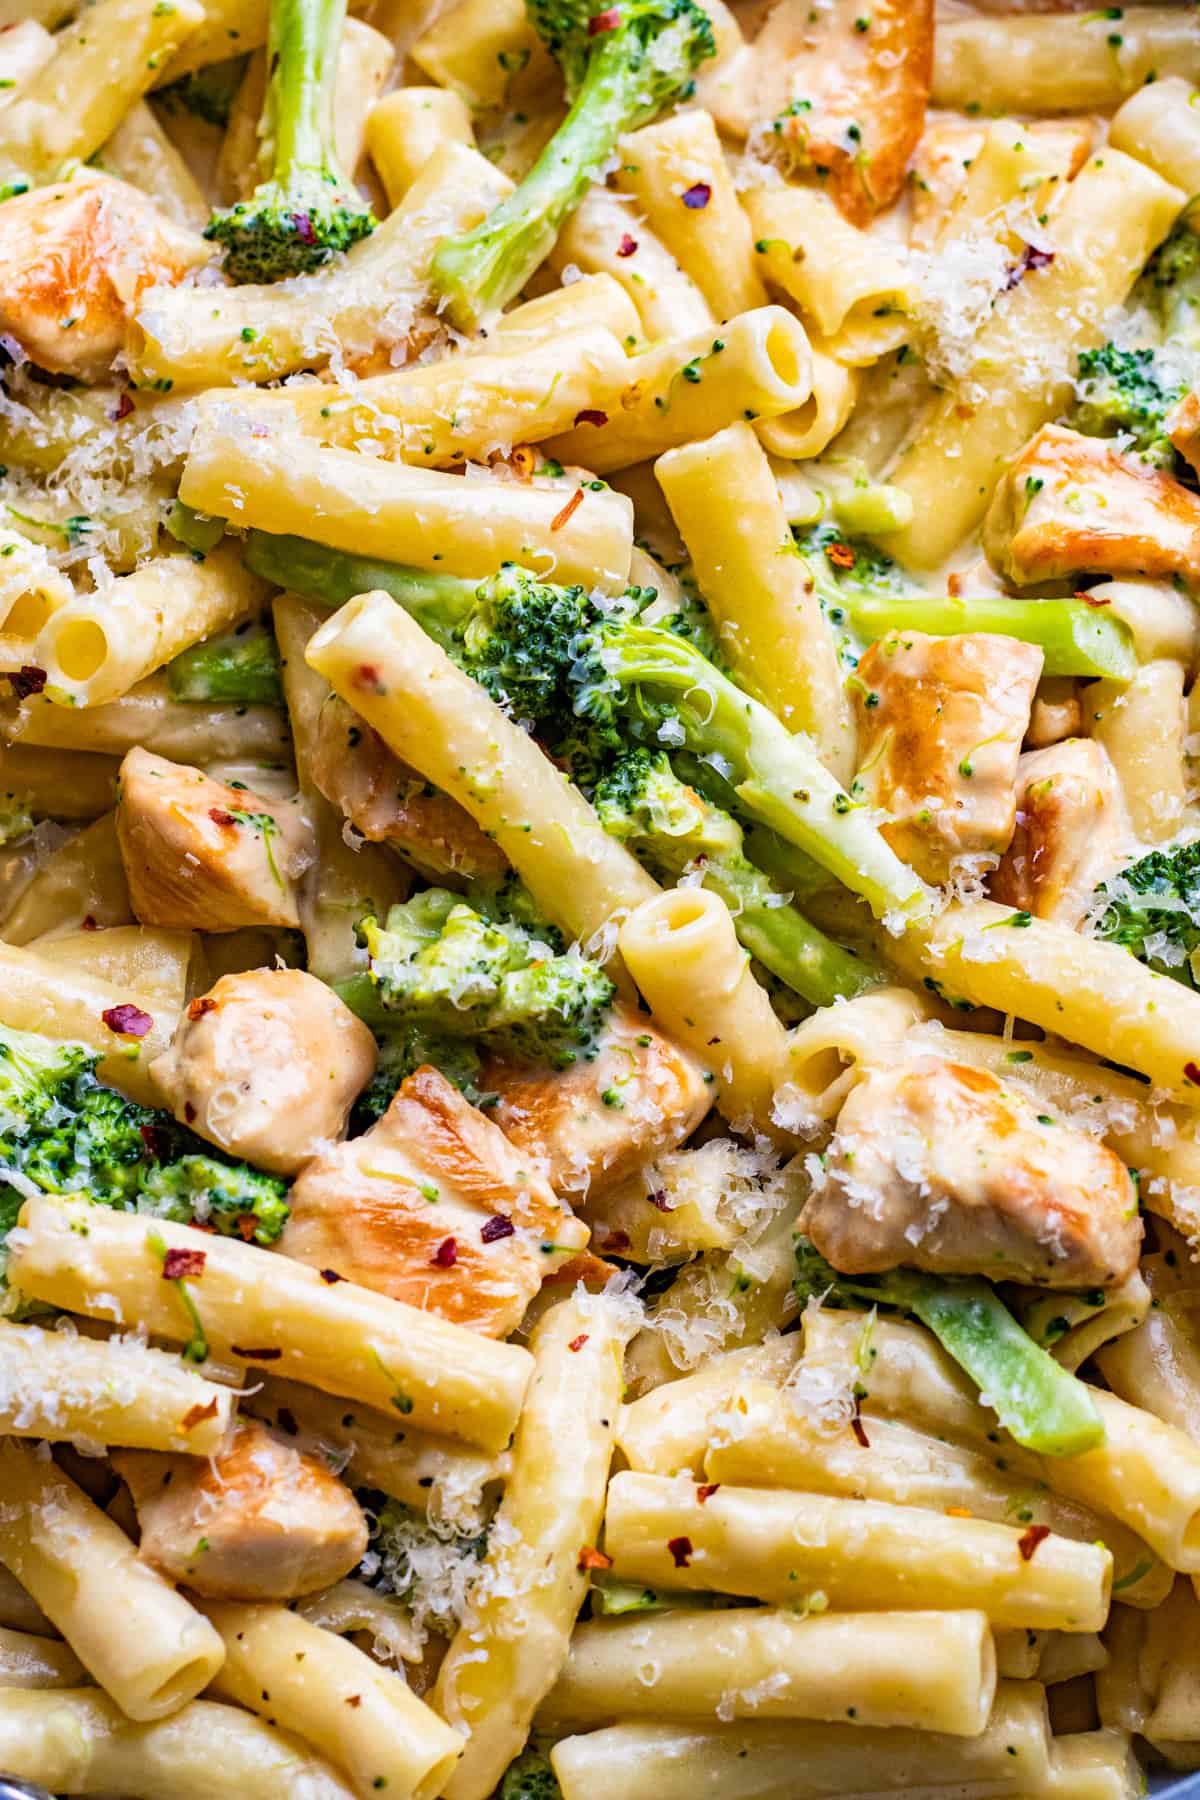 Pasta, diced chicken, and broccolli in creamy sauce.